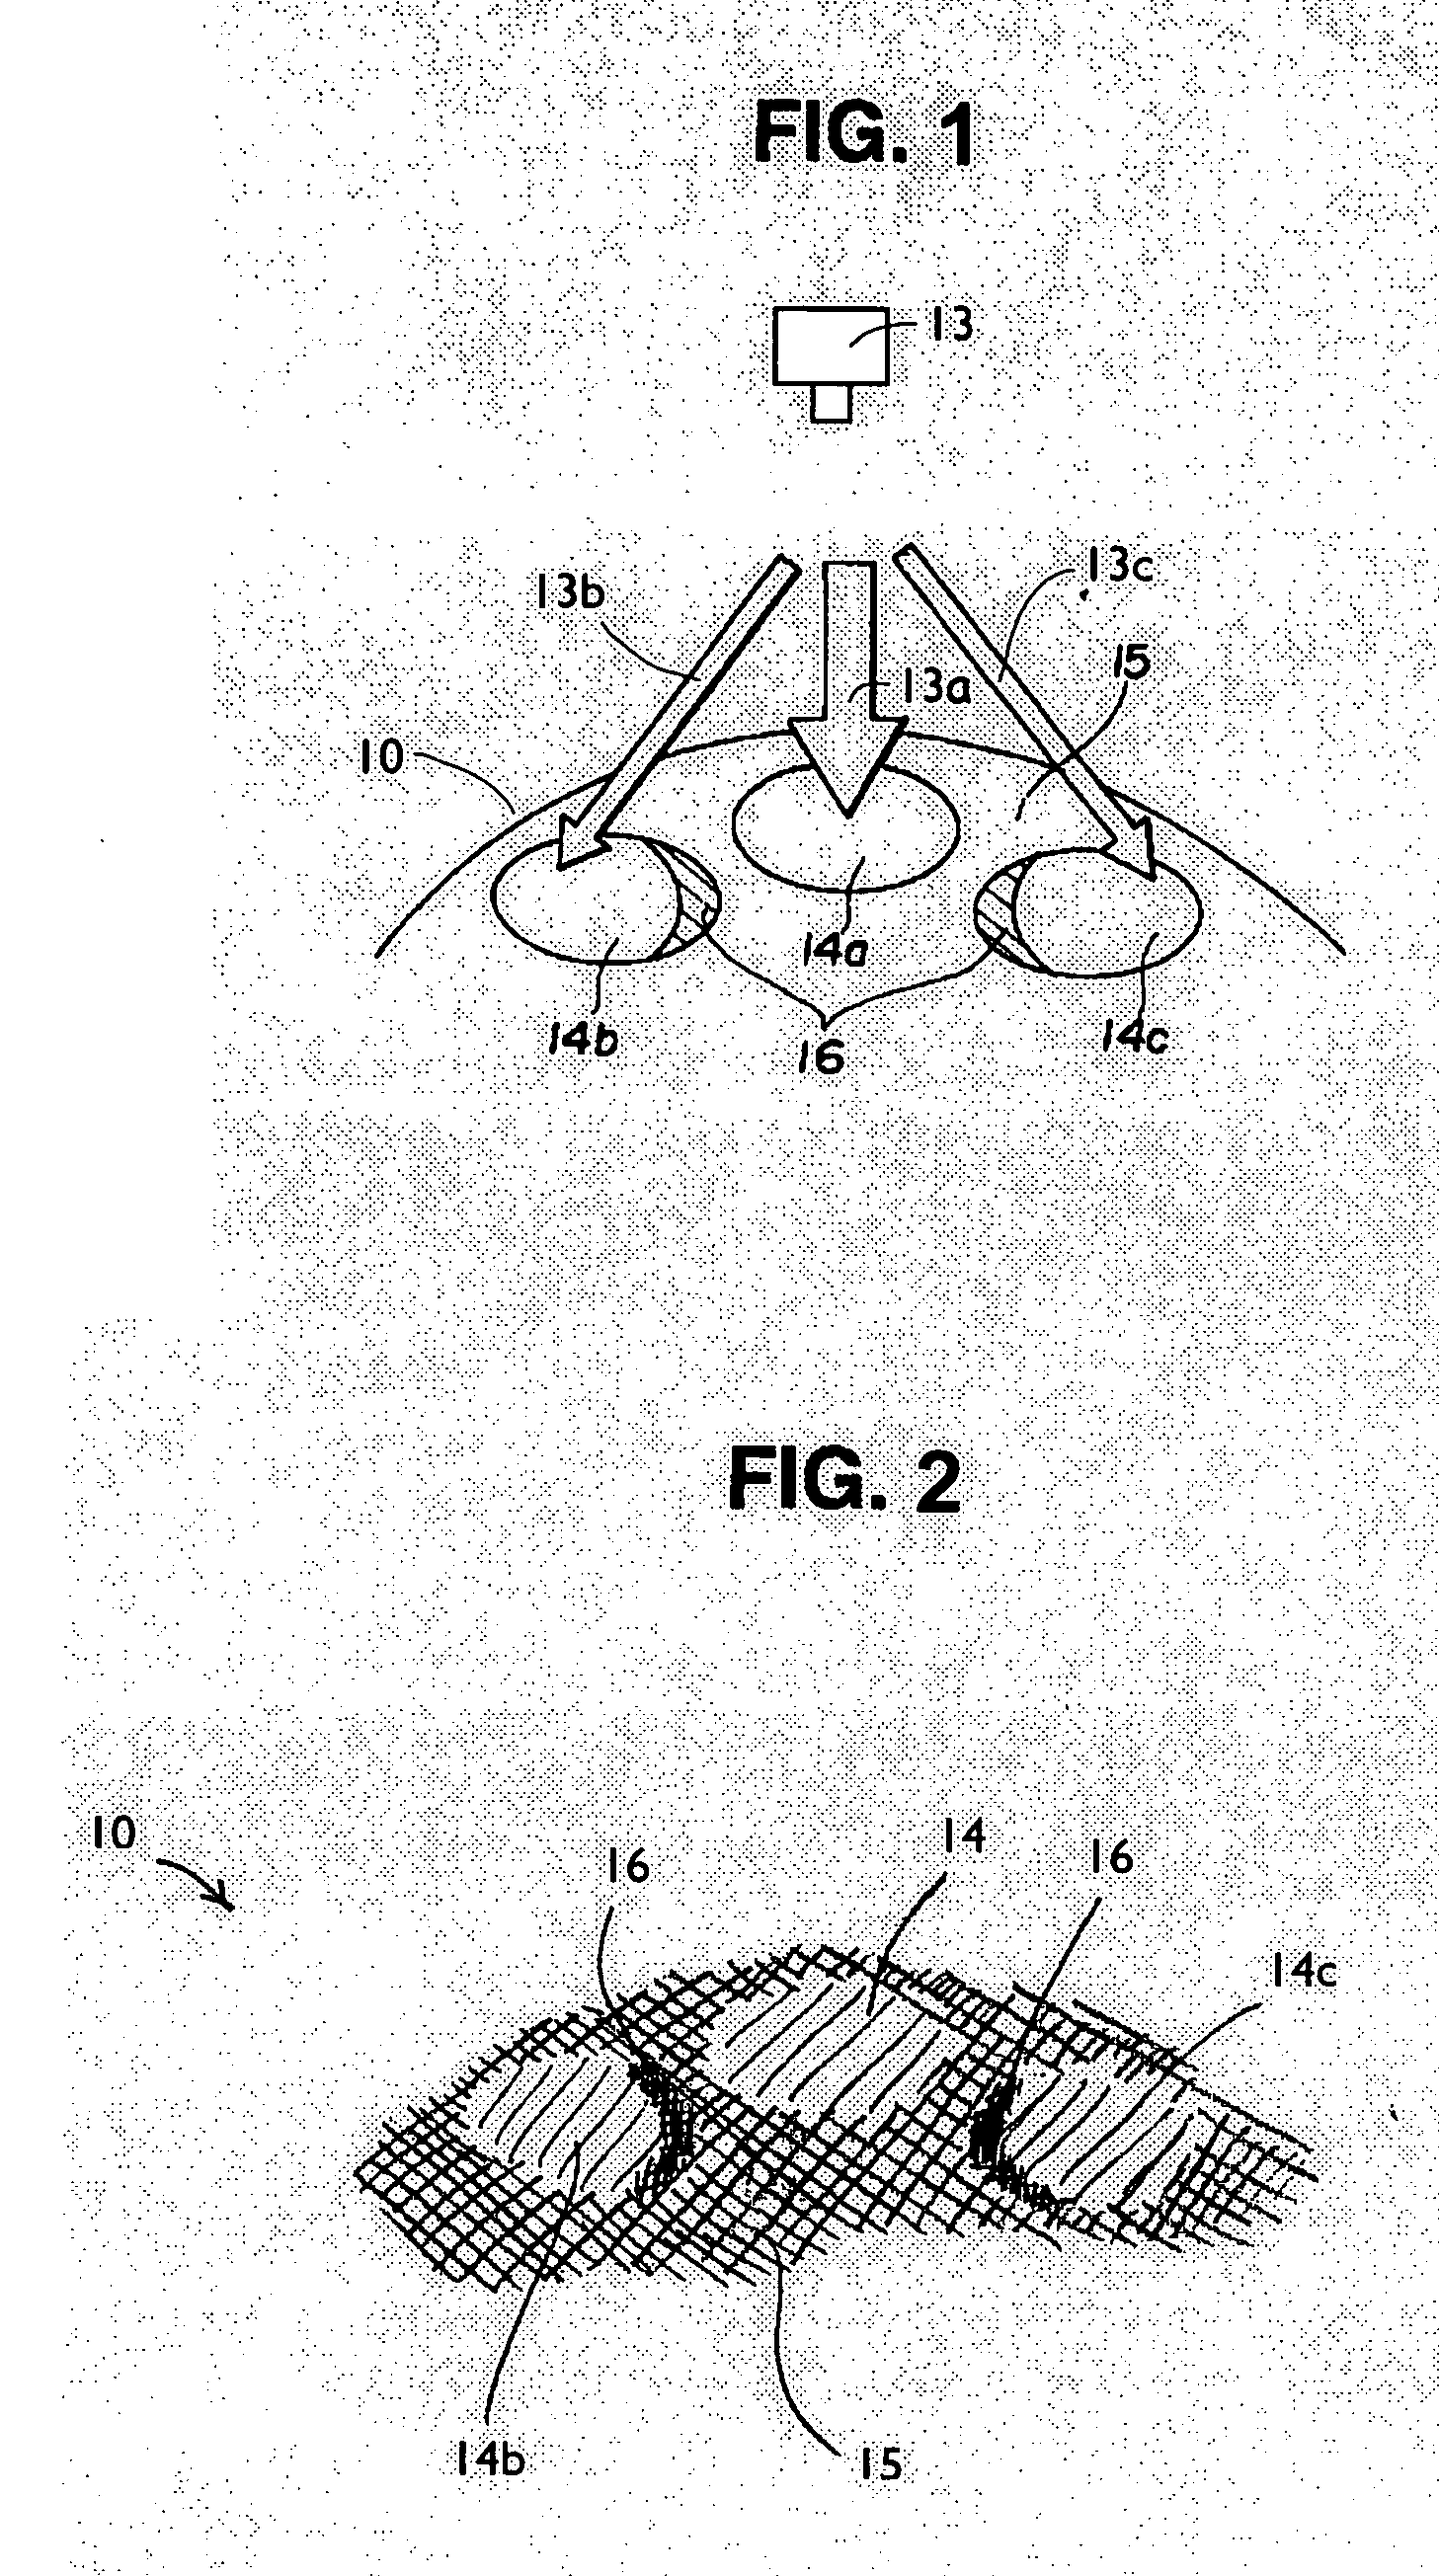 Apparatus and method for inspecting golf balls using infrared radiation